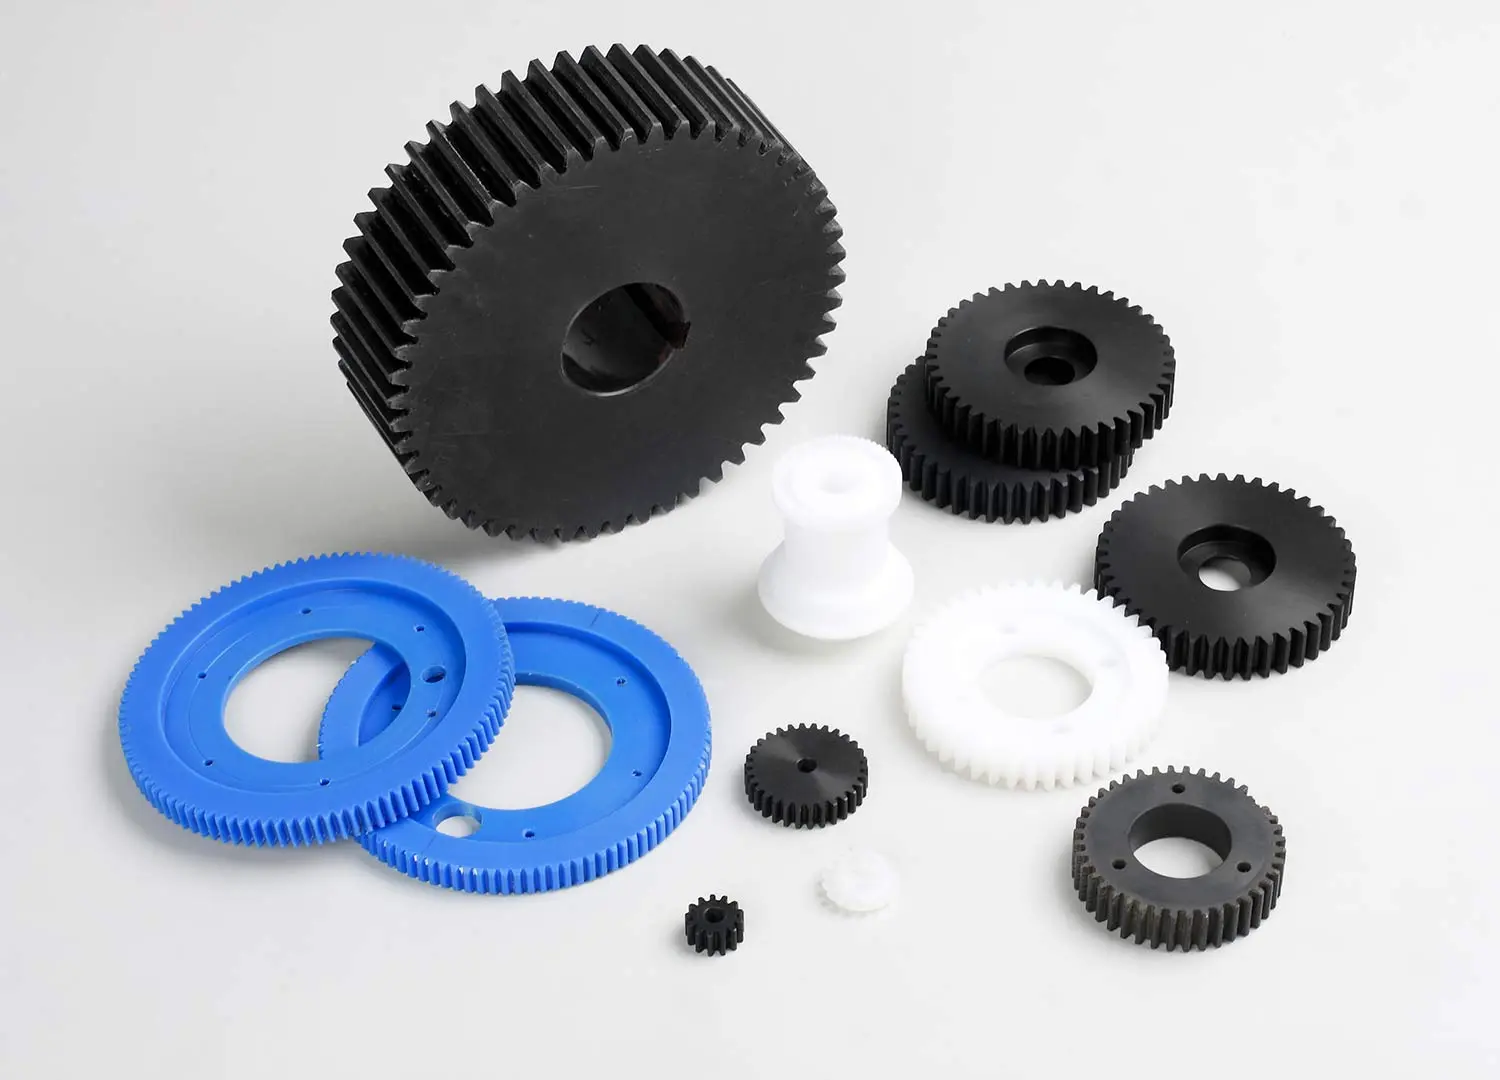 Plastic parts are a reliable solution